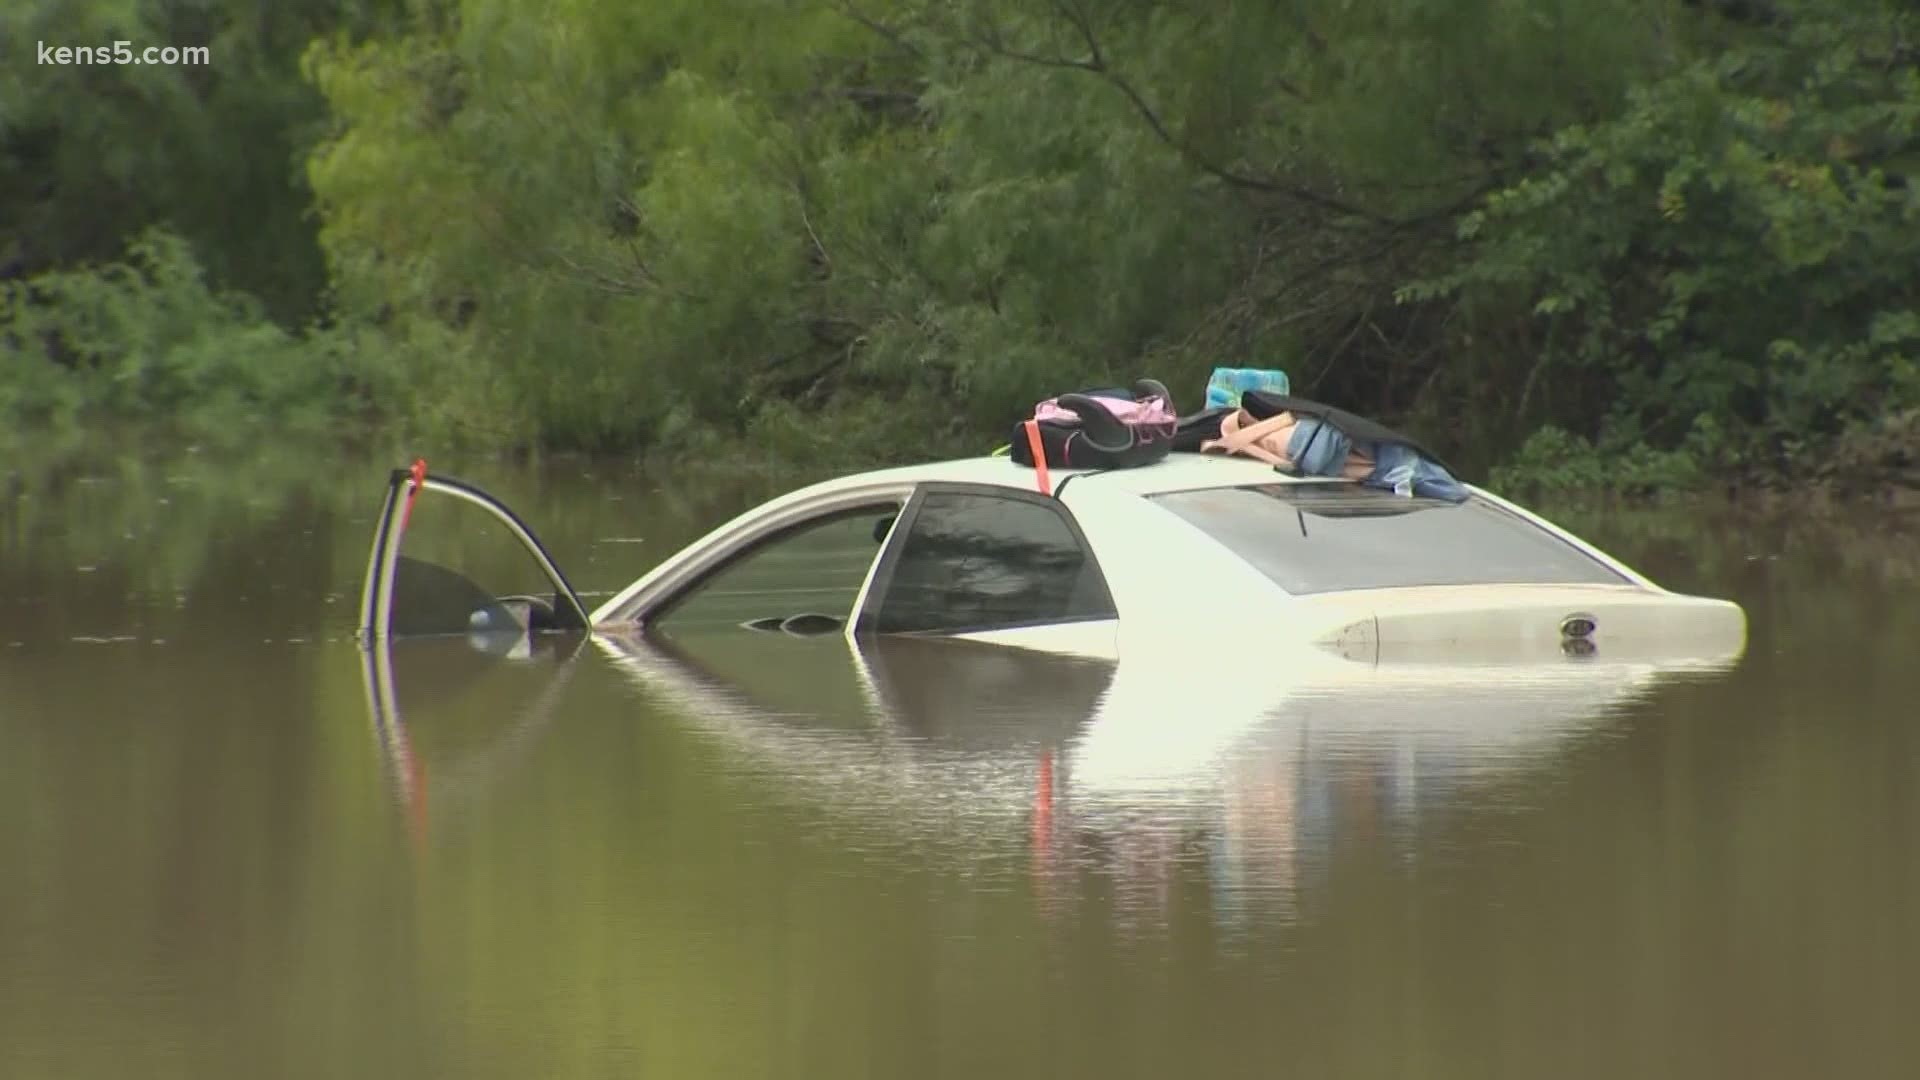 The San Antonio Fire Department launched a raft to check on people in flooded homes.